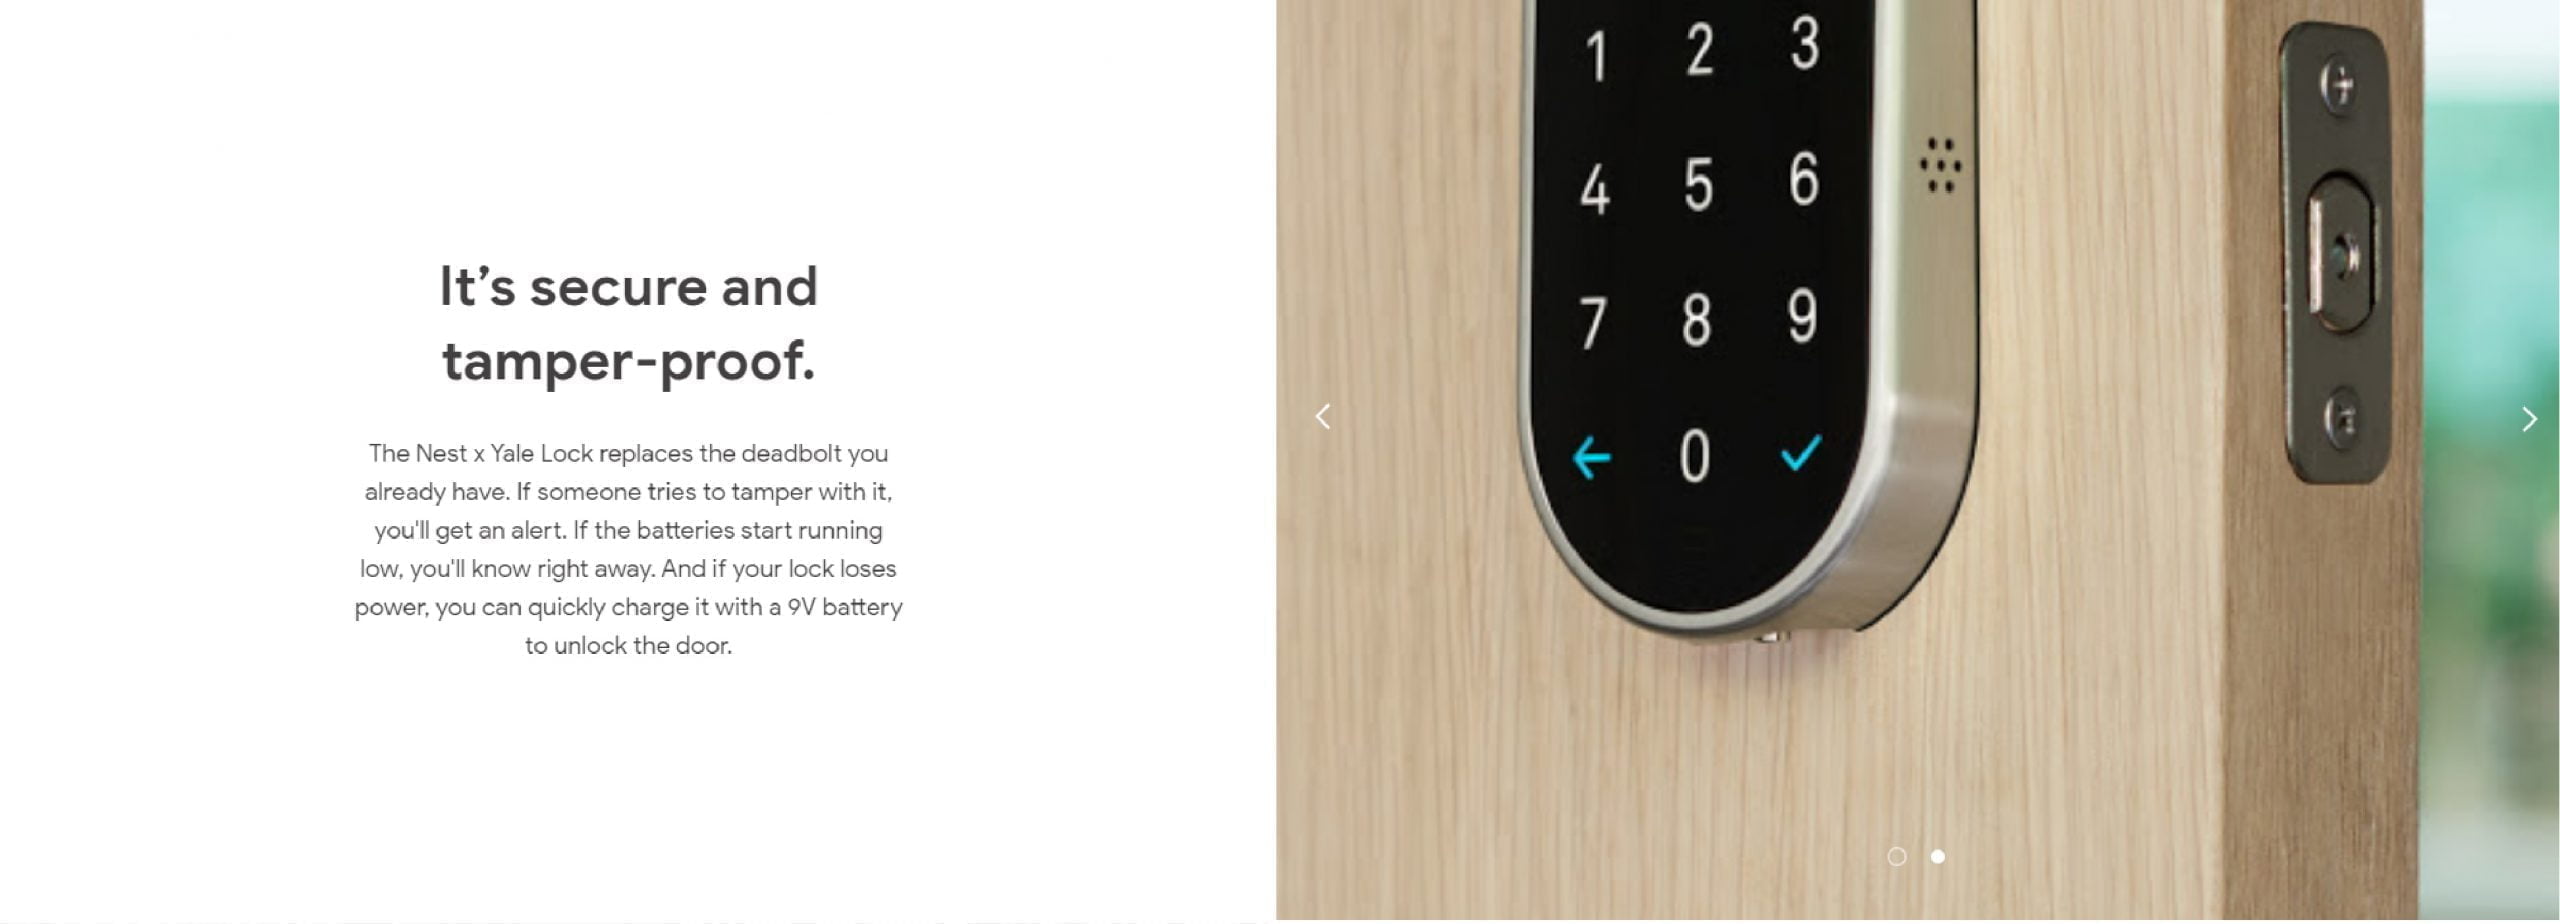 Nest Lock 10 Scaled Google &Lt;Ul Class=&Quot;A-Unordered-List A-Vertical A-Spacing-Mini&Quot;&Gt; &Lt;Li&Gt;&Lt;Span Class=&Quot;A-List-Item&Quot;&Gt;Secure And Tamper Proof: Replaces The Deadbolt You Already Have. If Someone Tries To Tamper With It, You'Ll Get An Alert. If The Batteries Start Running Low, You'Ll Know Right Away. And If Your Lock Loses Power, You Can Quickly Charge It With A 9V Battery To Unlock The Door.&Lt;/Span&Gt;&Lt;/Li&Gt; &Lt;Li&Gt;&Lt;Span Class=&Quot;A-List-Item&Quot;&Gt;Let Someone In From Anywhere: Unlock Your Door From Your Nest App. Create Passcodes For Family, Guests And People You Trust. Get Alerts Whenever Someone Unlocks And Locks The Door. And When Nest Knows You’re Away, Your Door Can Lock Automatically.&Lt;/Span&Gt;&Lt;/Li&Gt; &Lt;Li&Gt;&Lt;Span Class=&Quot;A-List-Item&Quot;&Gt;Works With Google Assistant: Check The Status Of Your Door And Lock It From Anywhere Hands‑Free With The Google Assistant. You Can Also Enter A Passcode, Use One‑Touch Locking, Or Lock It From The Nest App.&Lt;/Span&Gt;&Lt;/Li&Gt; &Lt;Li&Gt;&Lt;Span Class=&Quot;A-List-Item&Quot;&Gt;Touchscreen Keypad: No Phone? No Problem. Unlock Your Nest X Yale Lock By Entering Your Passcode On The Touchscreen Keypad. Create Passcodes For People You Trust.&Lt;/Span&Gt;&Lt;/Li&Gt; &Lt;/Ul&Gt; Https://Youtu.be/Dbdxol3Avxe Google Rb-Yrd540-Wv-619 X Yale Lock With Nest Connect Google Rb-Yrd540-Wv-619 X Yale Lock With Nest Connect, Satin Nickel